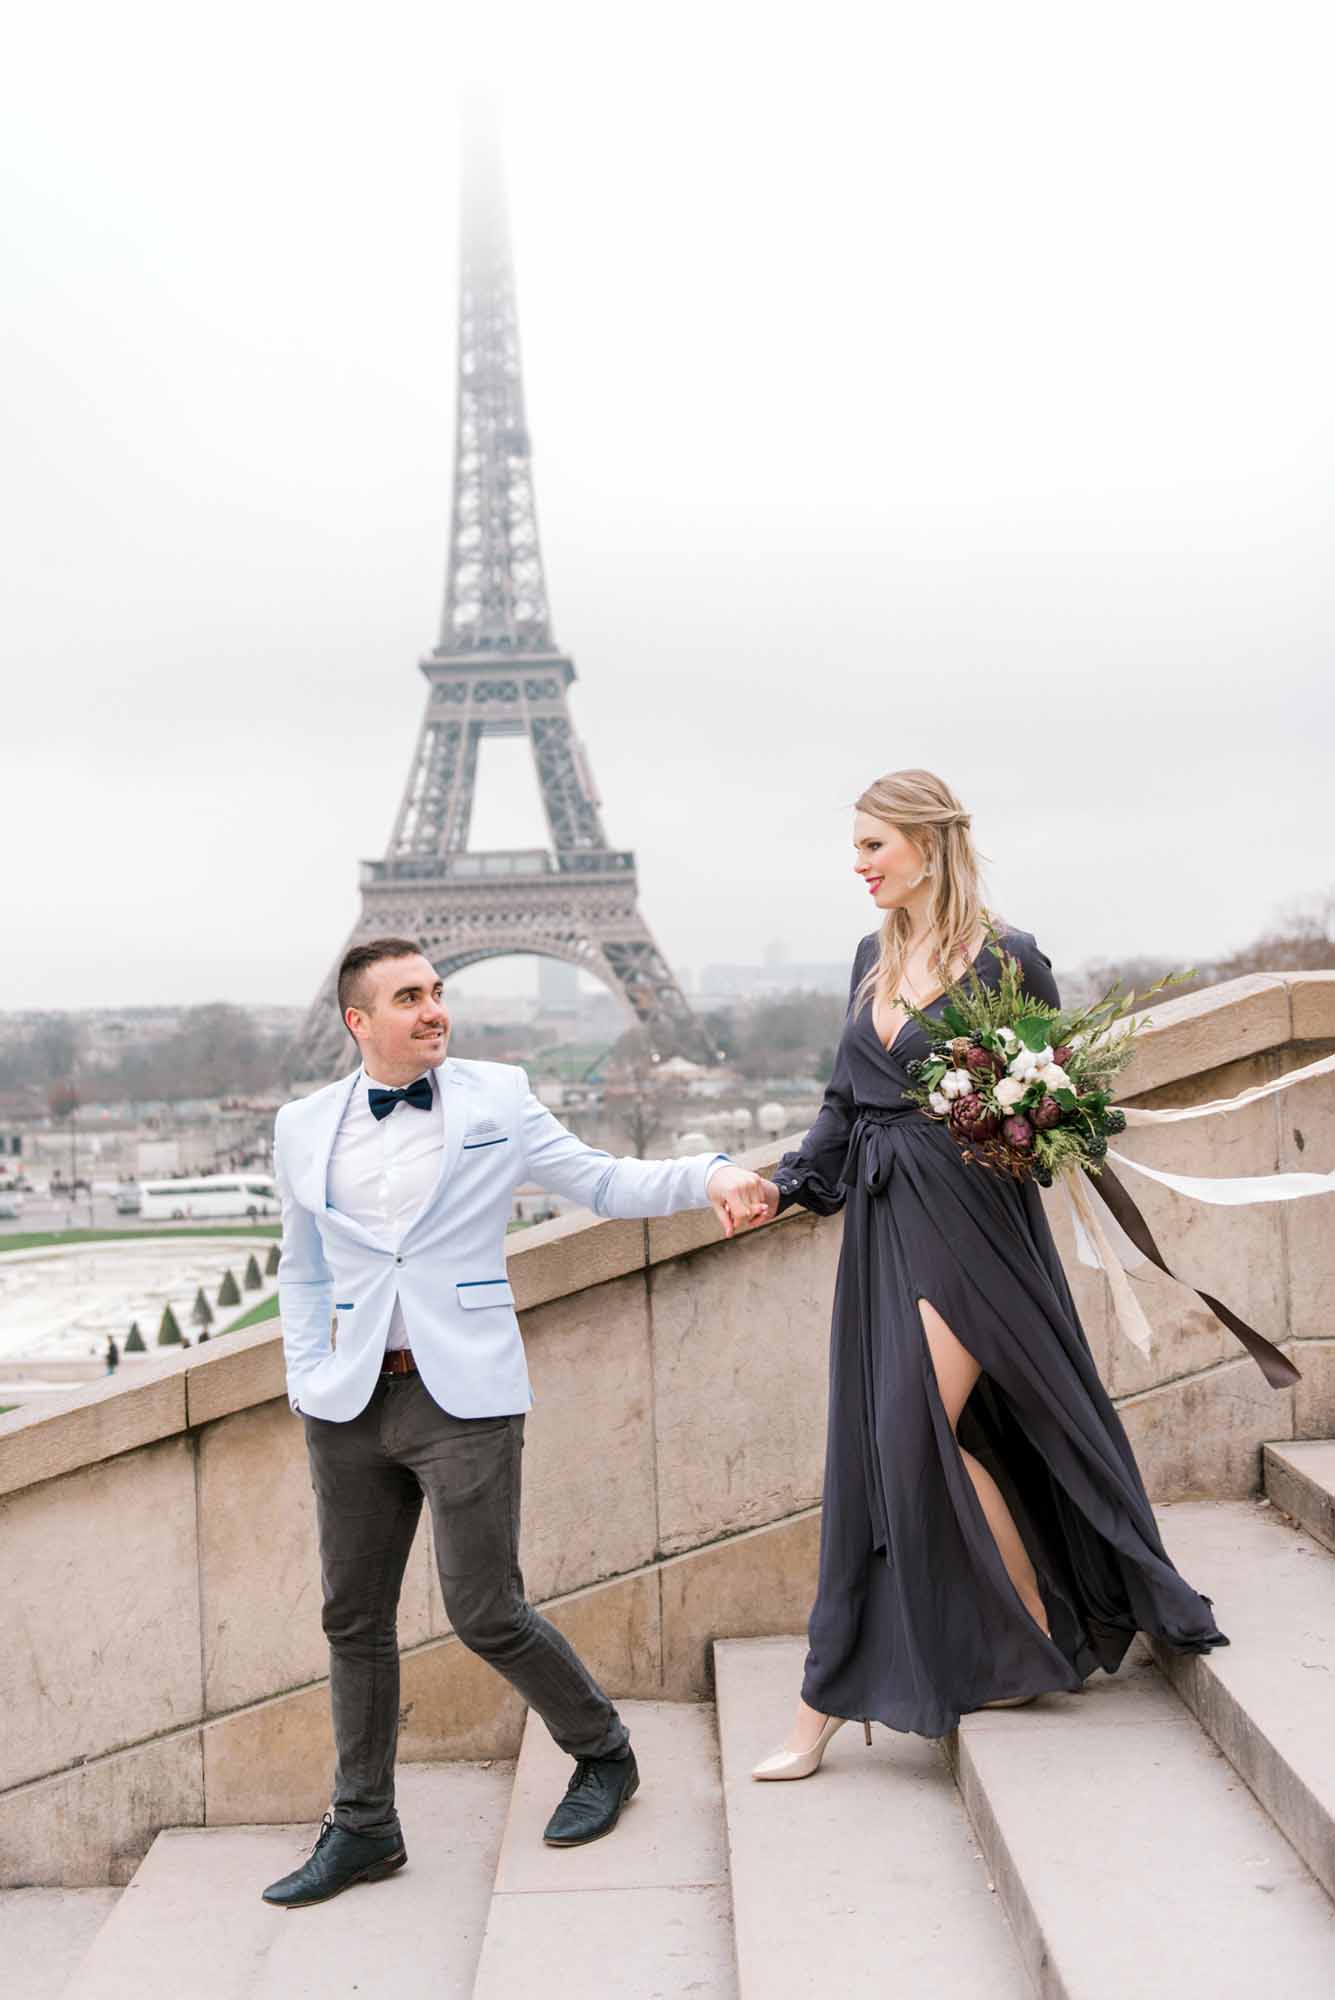 newly engaged couple walks down steps in Paris with the Eiffel Tower in the background during winter time